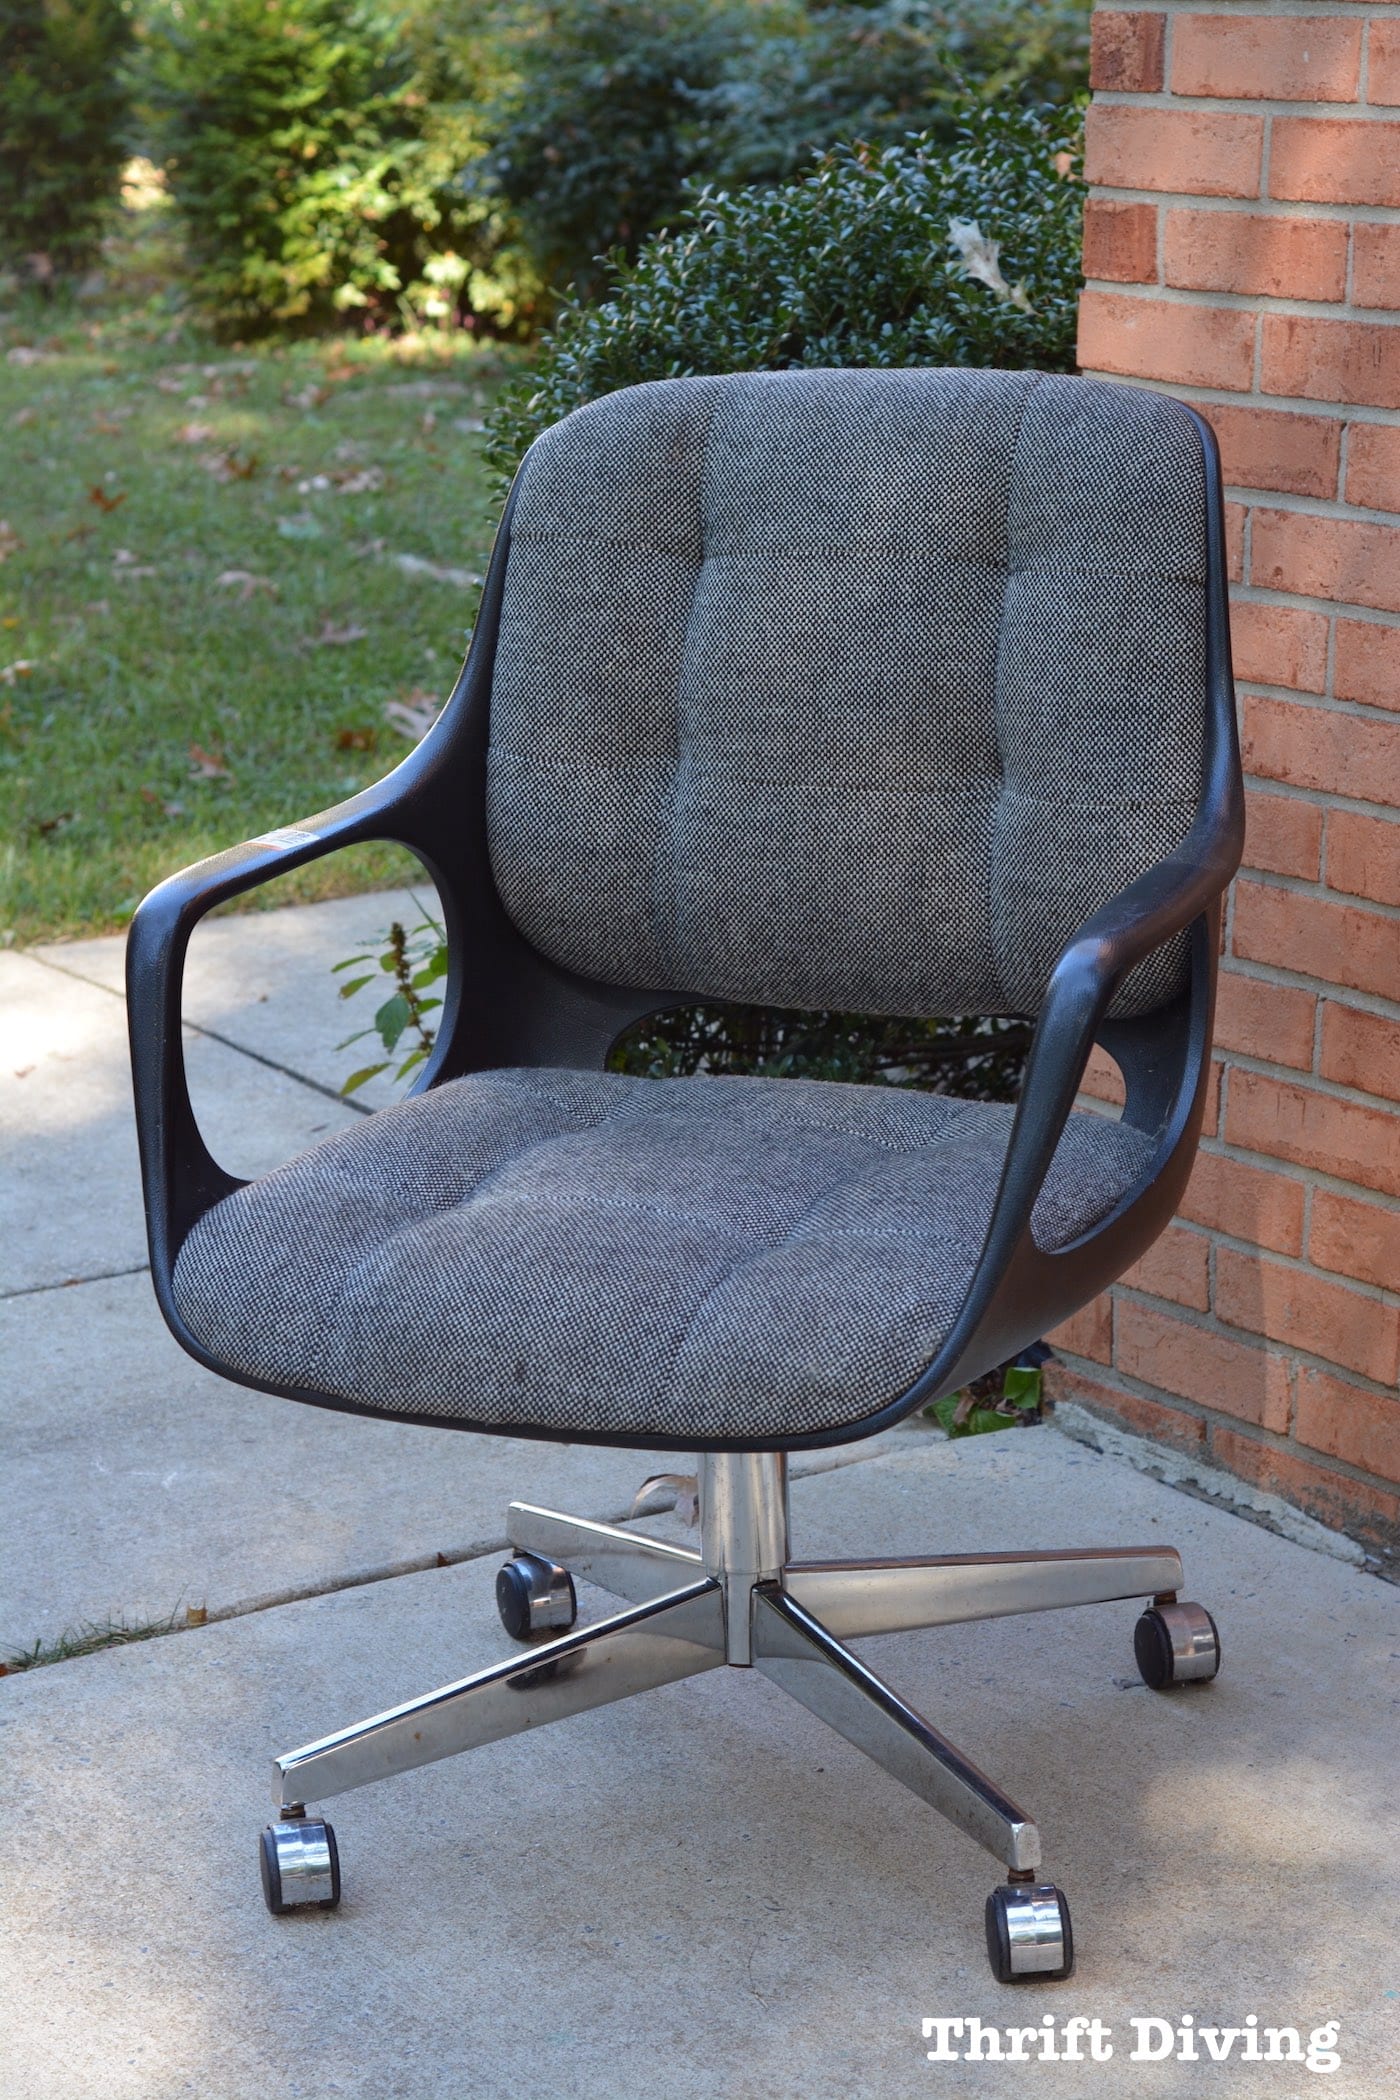 BEFORE and AFTER: Reupholster a mid-century modern chair - Chromcraft vintage MCM chair - Thrift Diving